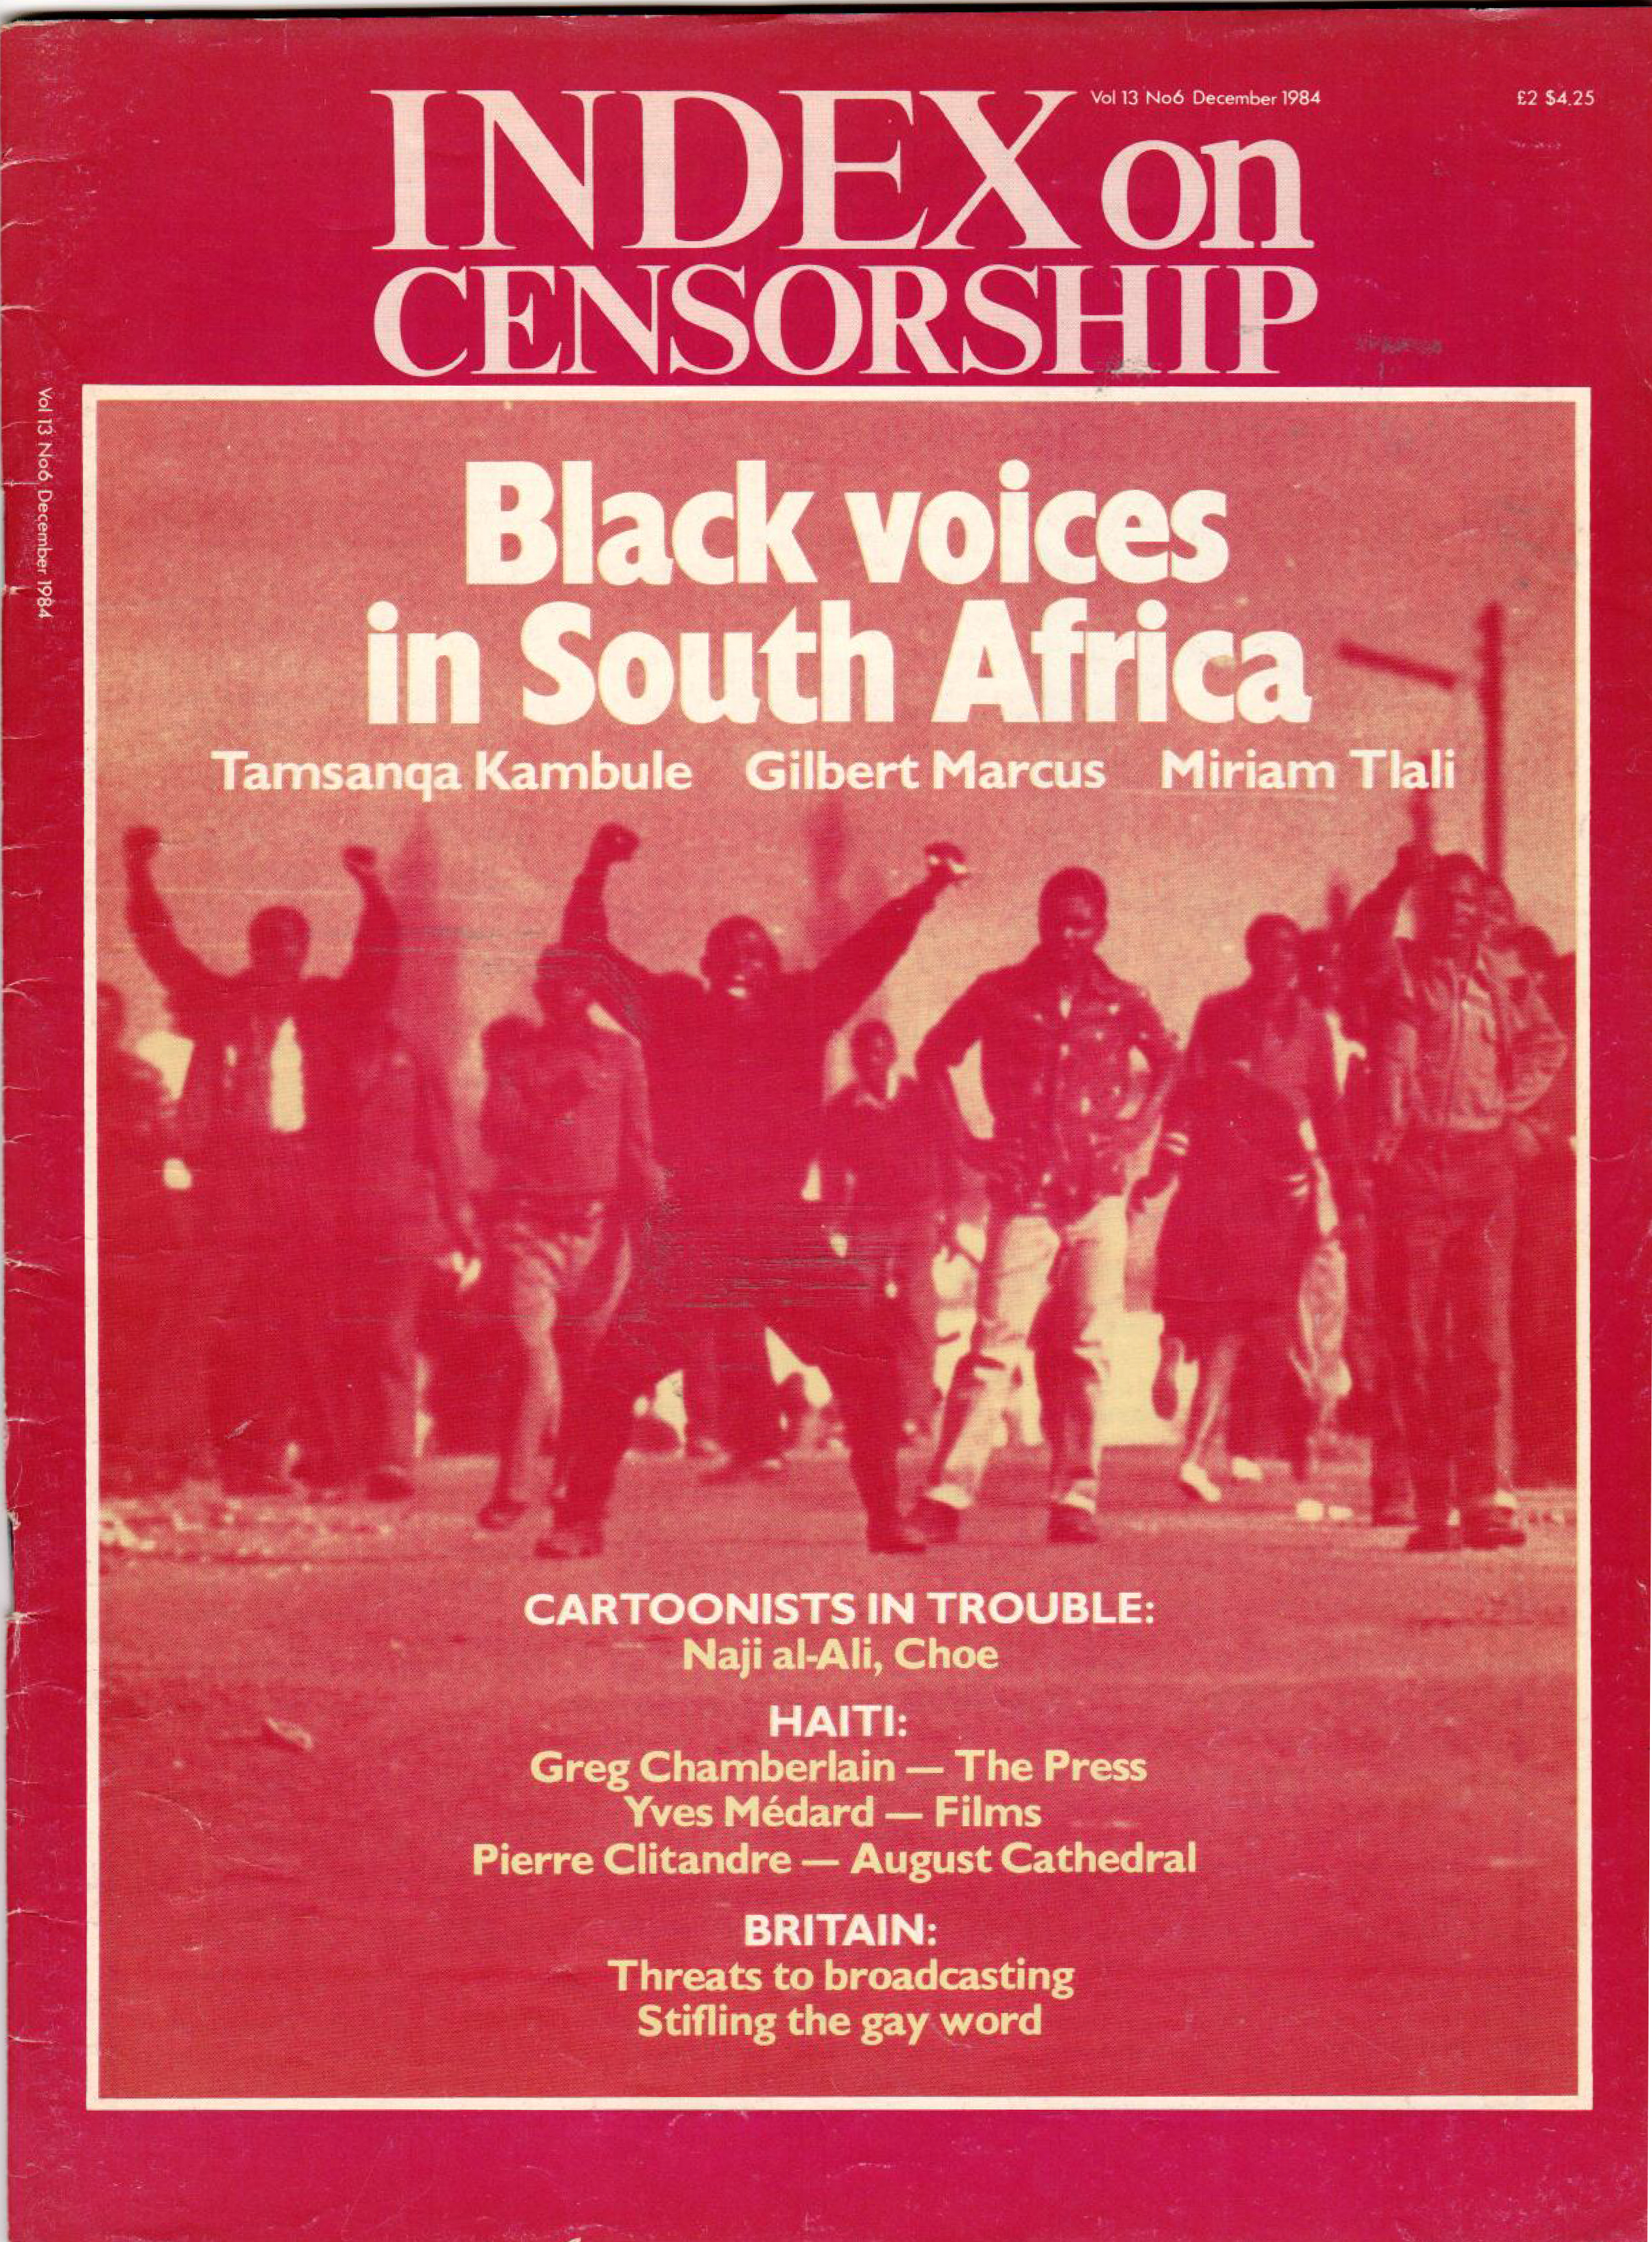 Black Voices in South Africa, the December 1984 issue of Index on Censorship magazine.